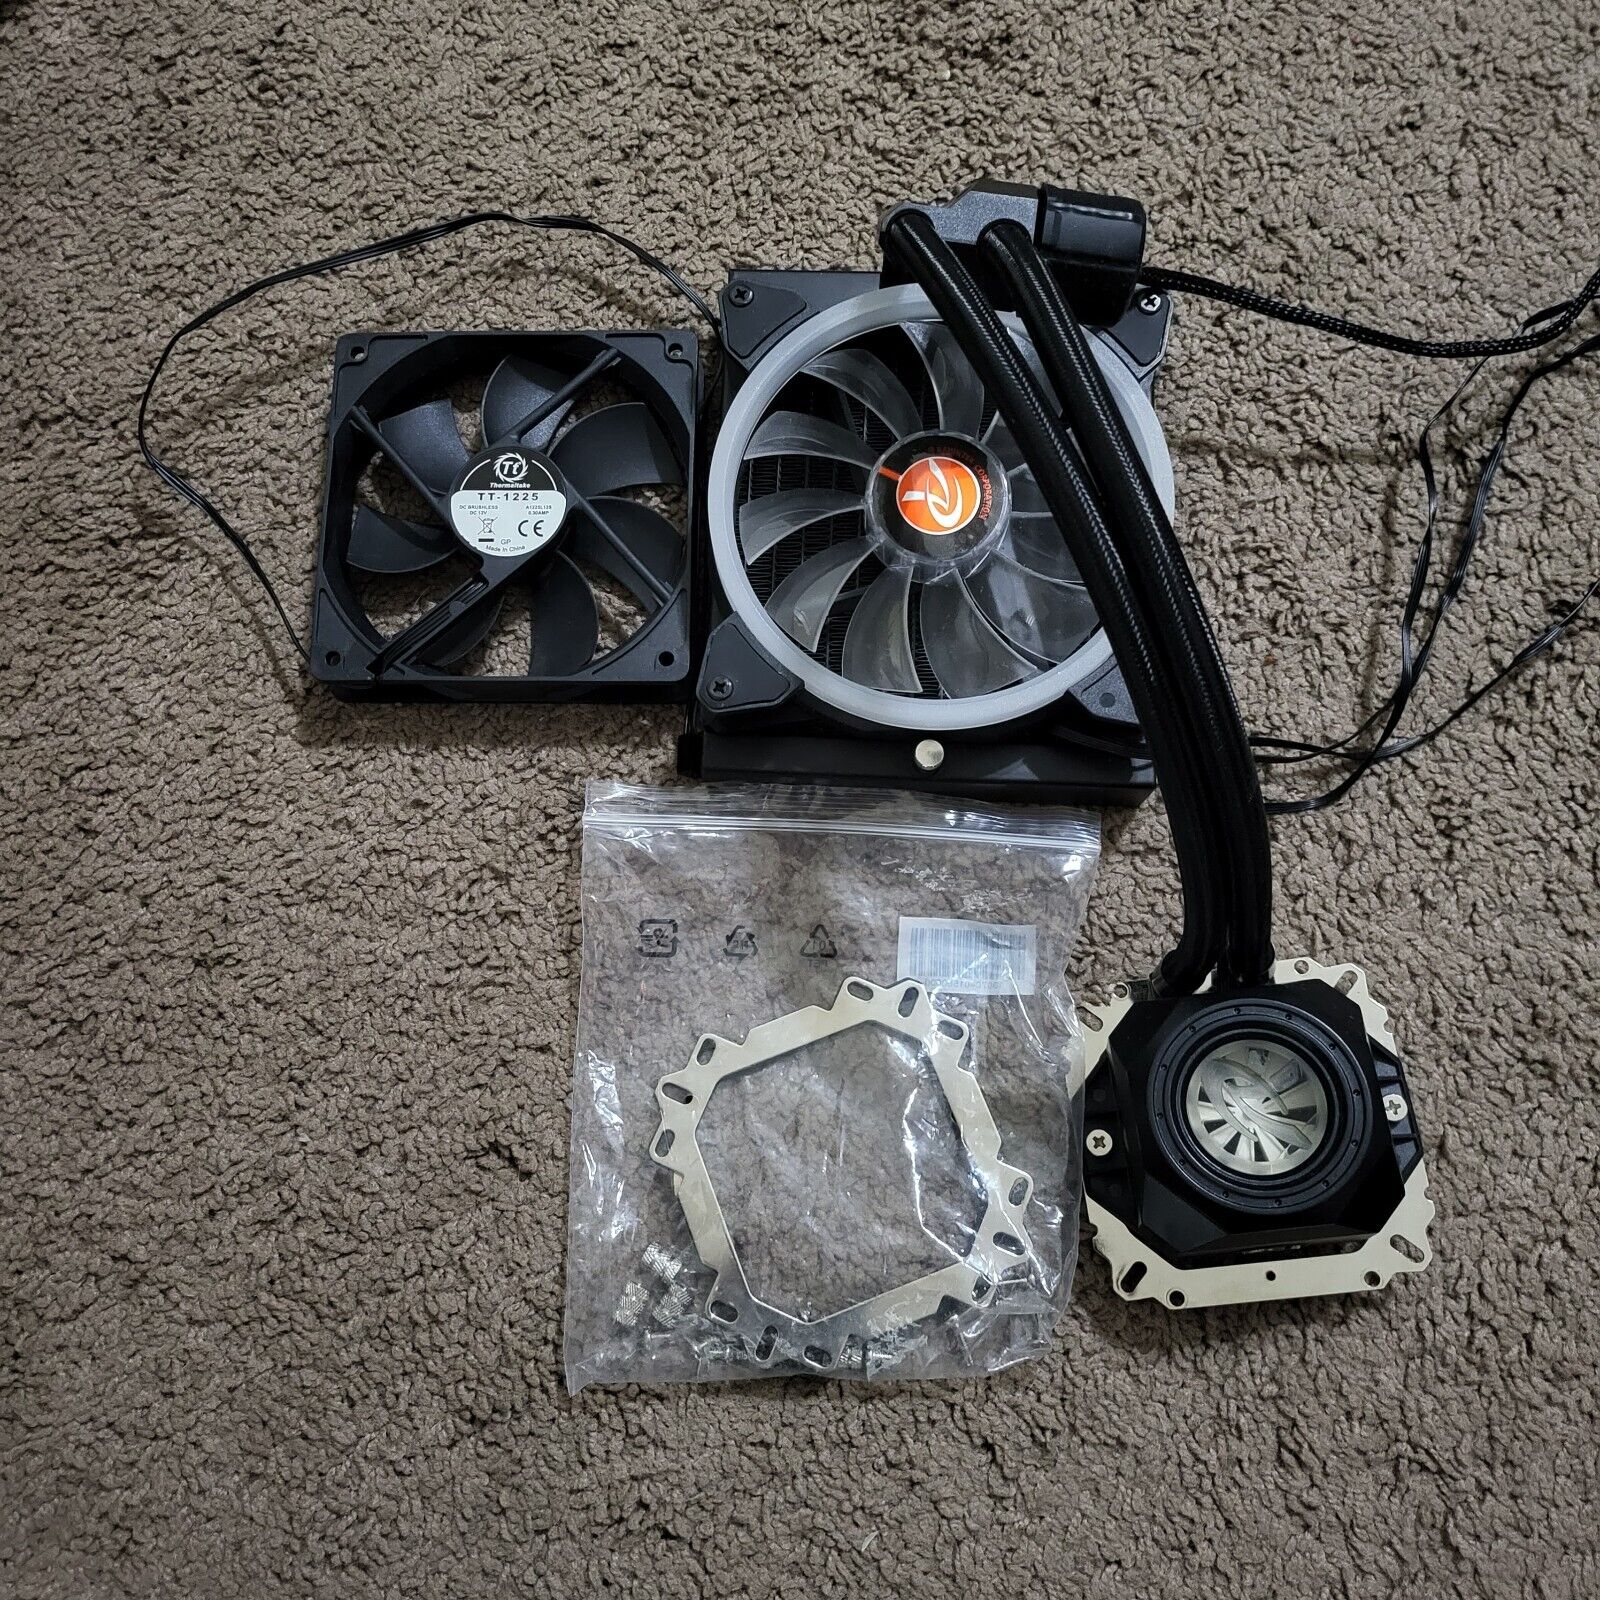 RAIJINTEK ORCUS 140 RBW computer liquid cooling with 2 extra case fans